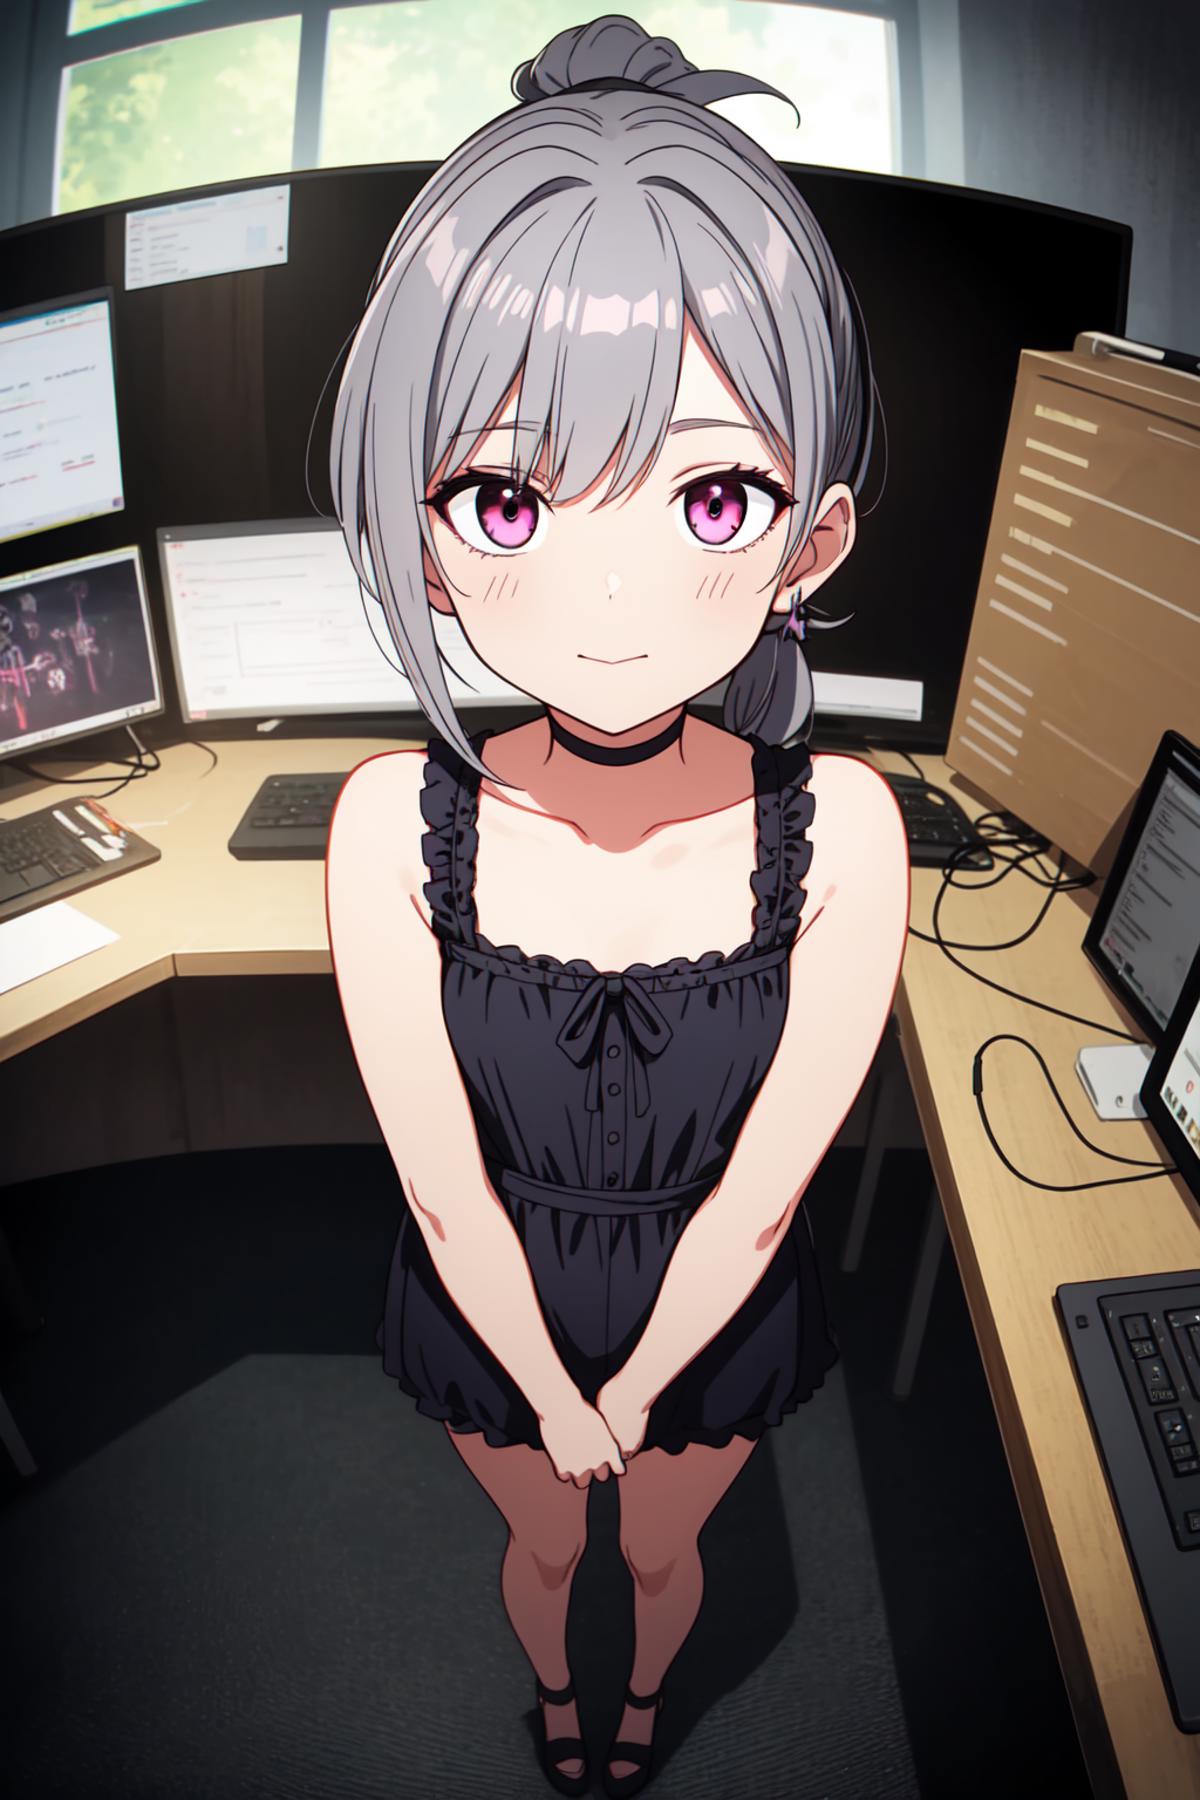 A young girl in a black dress sitting in a room with computer monitors.